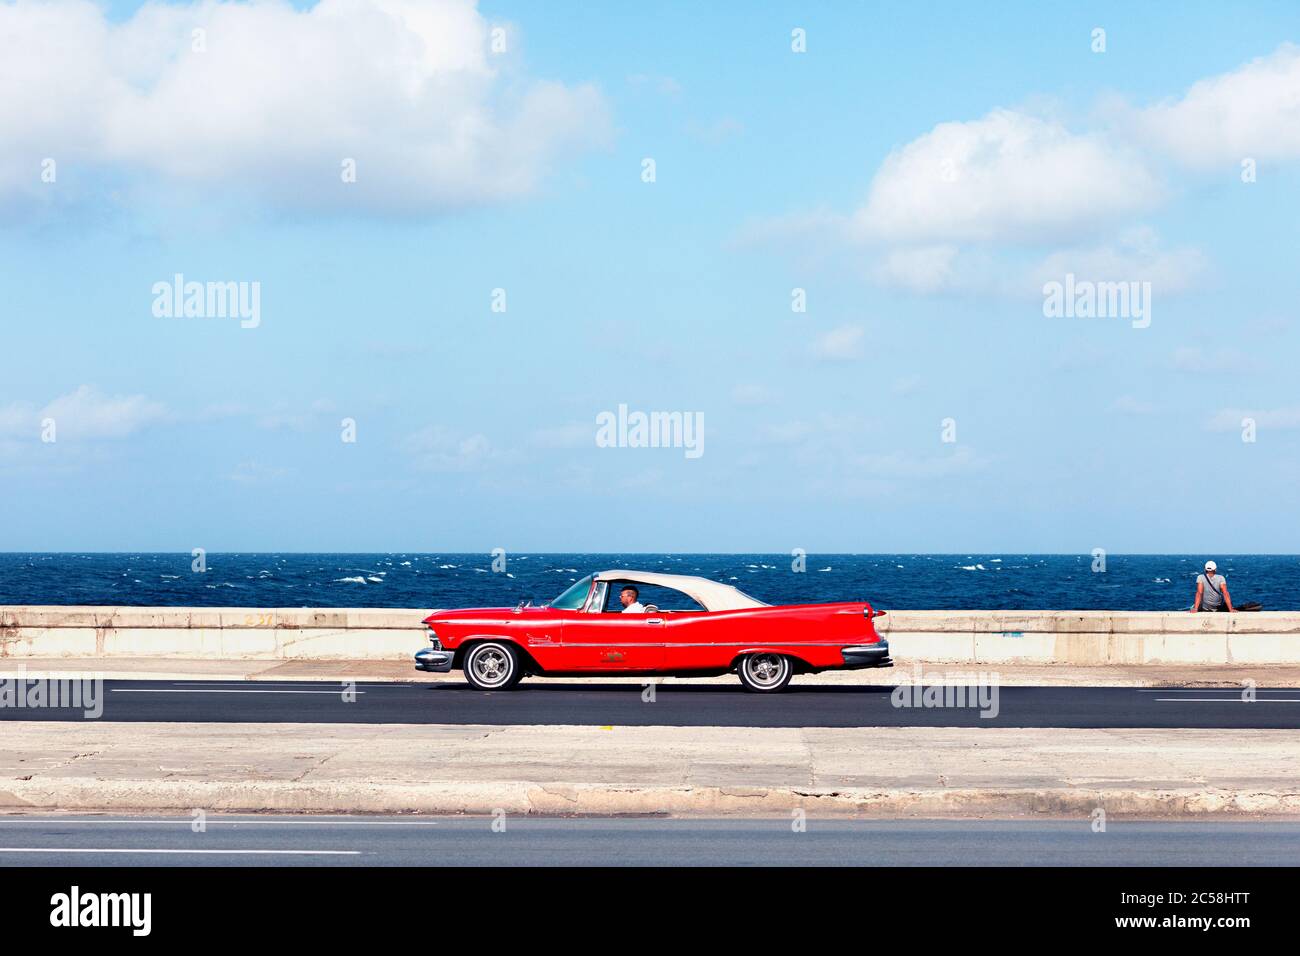 Classic car in Cuba most famous street, Malecon. The Sea, the red classic car. The essential Cuba Stock Photo